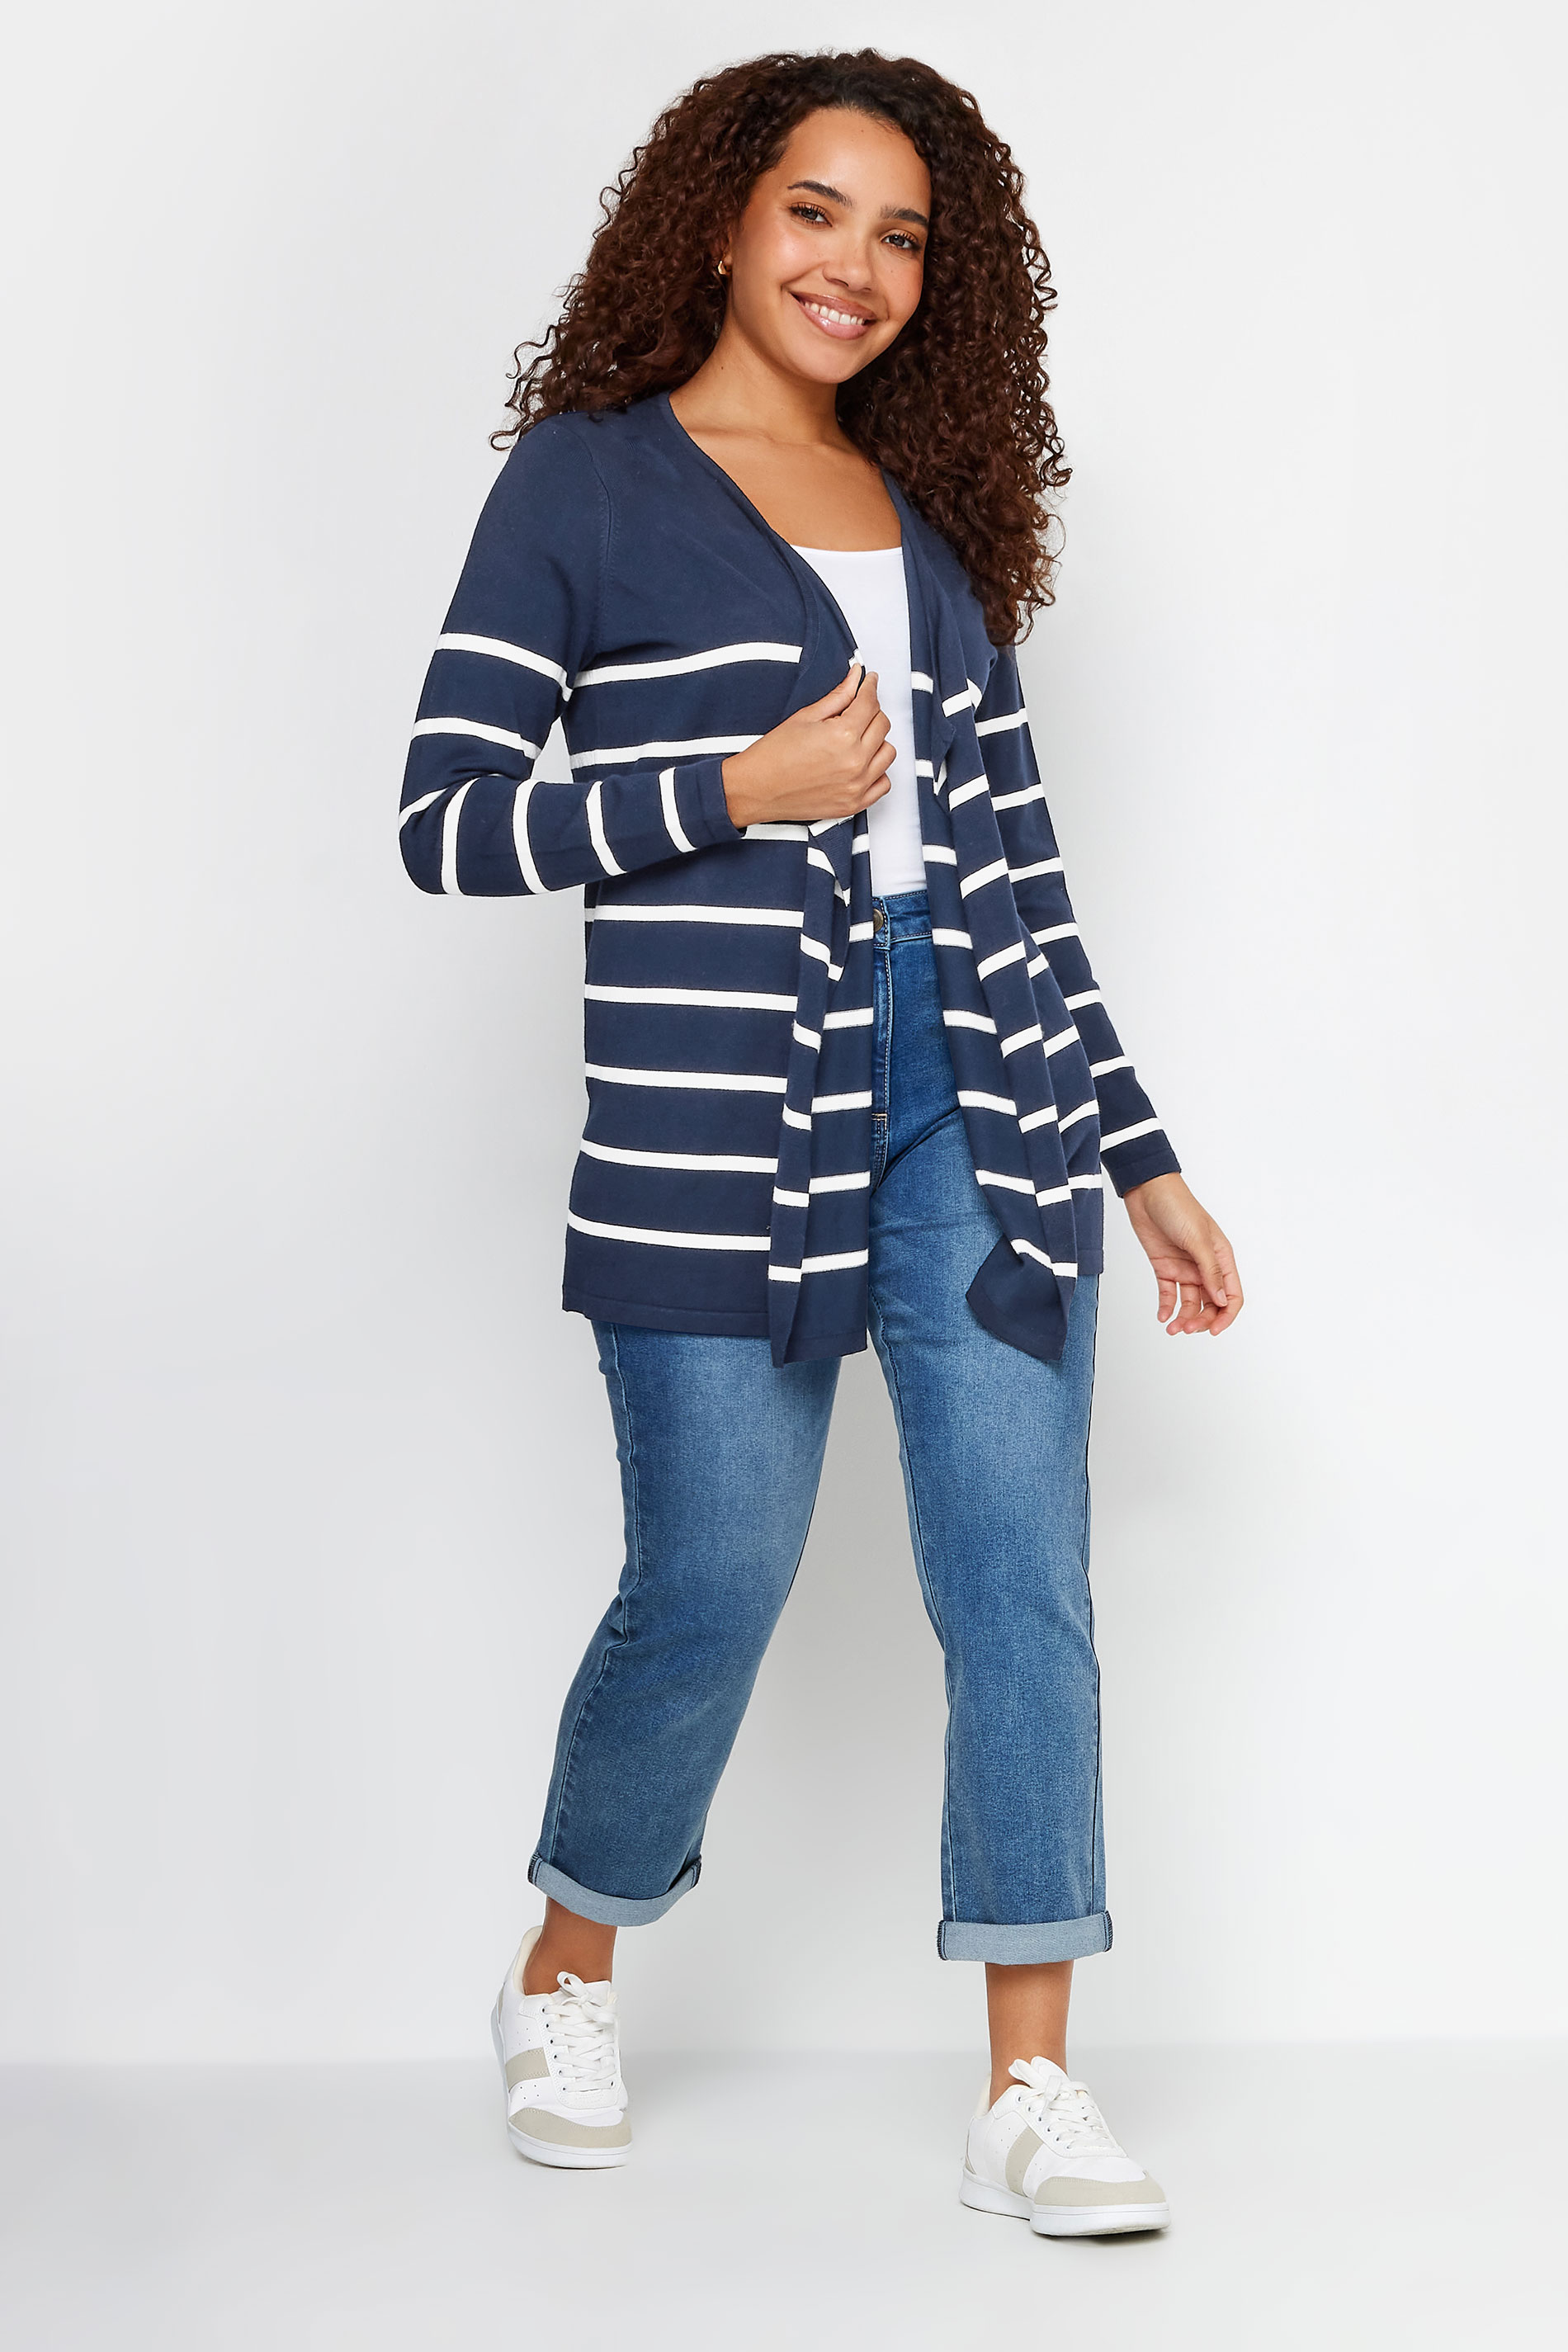 M&Co Navy Blue & White Striped Waterfall Cardigan | M&Co 2